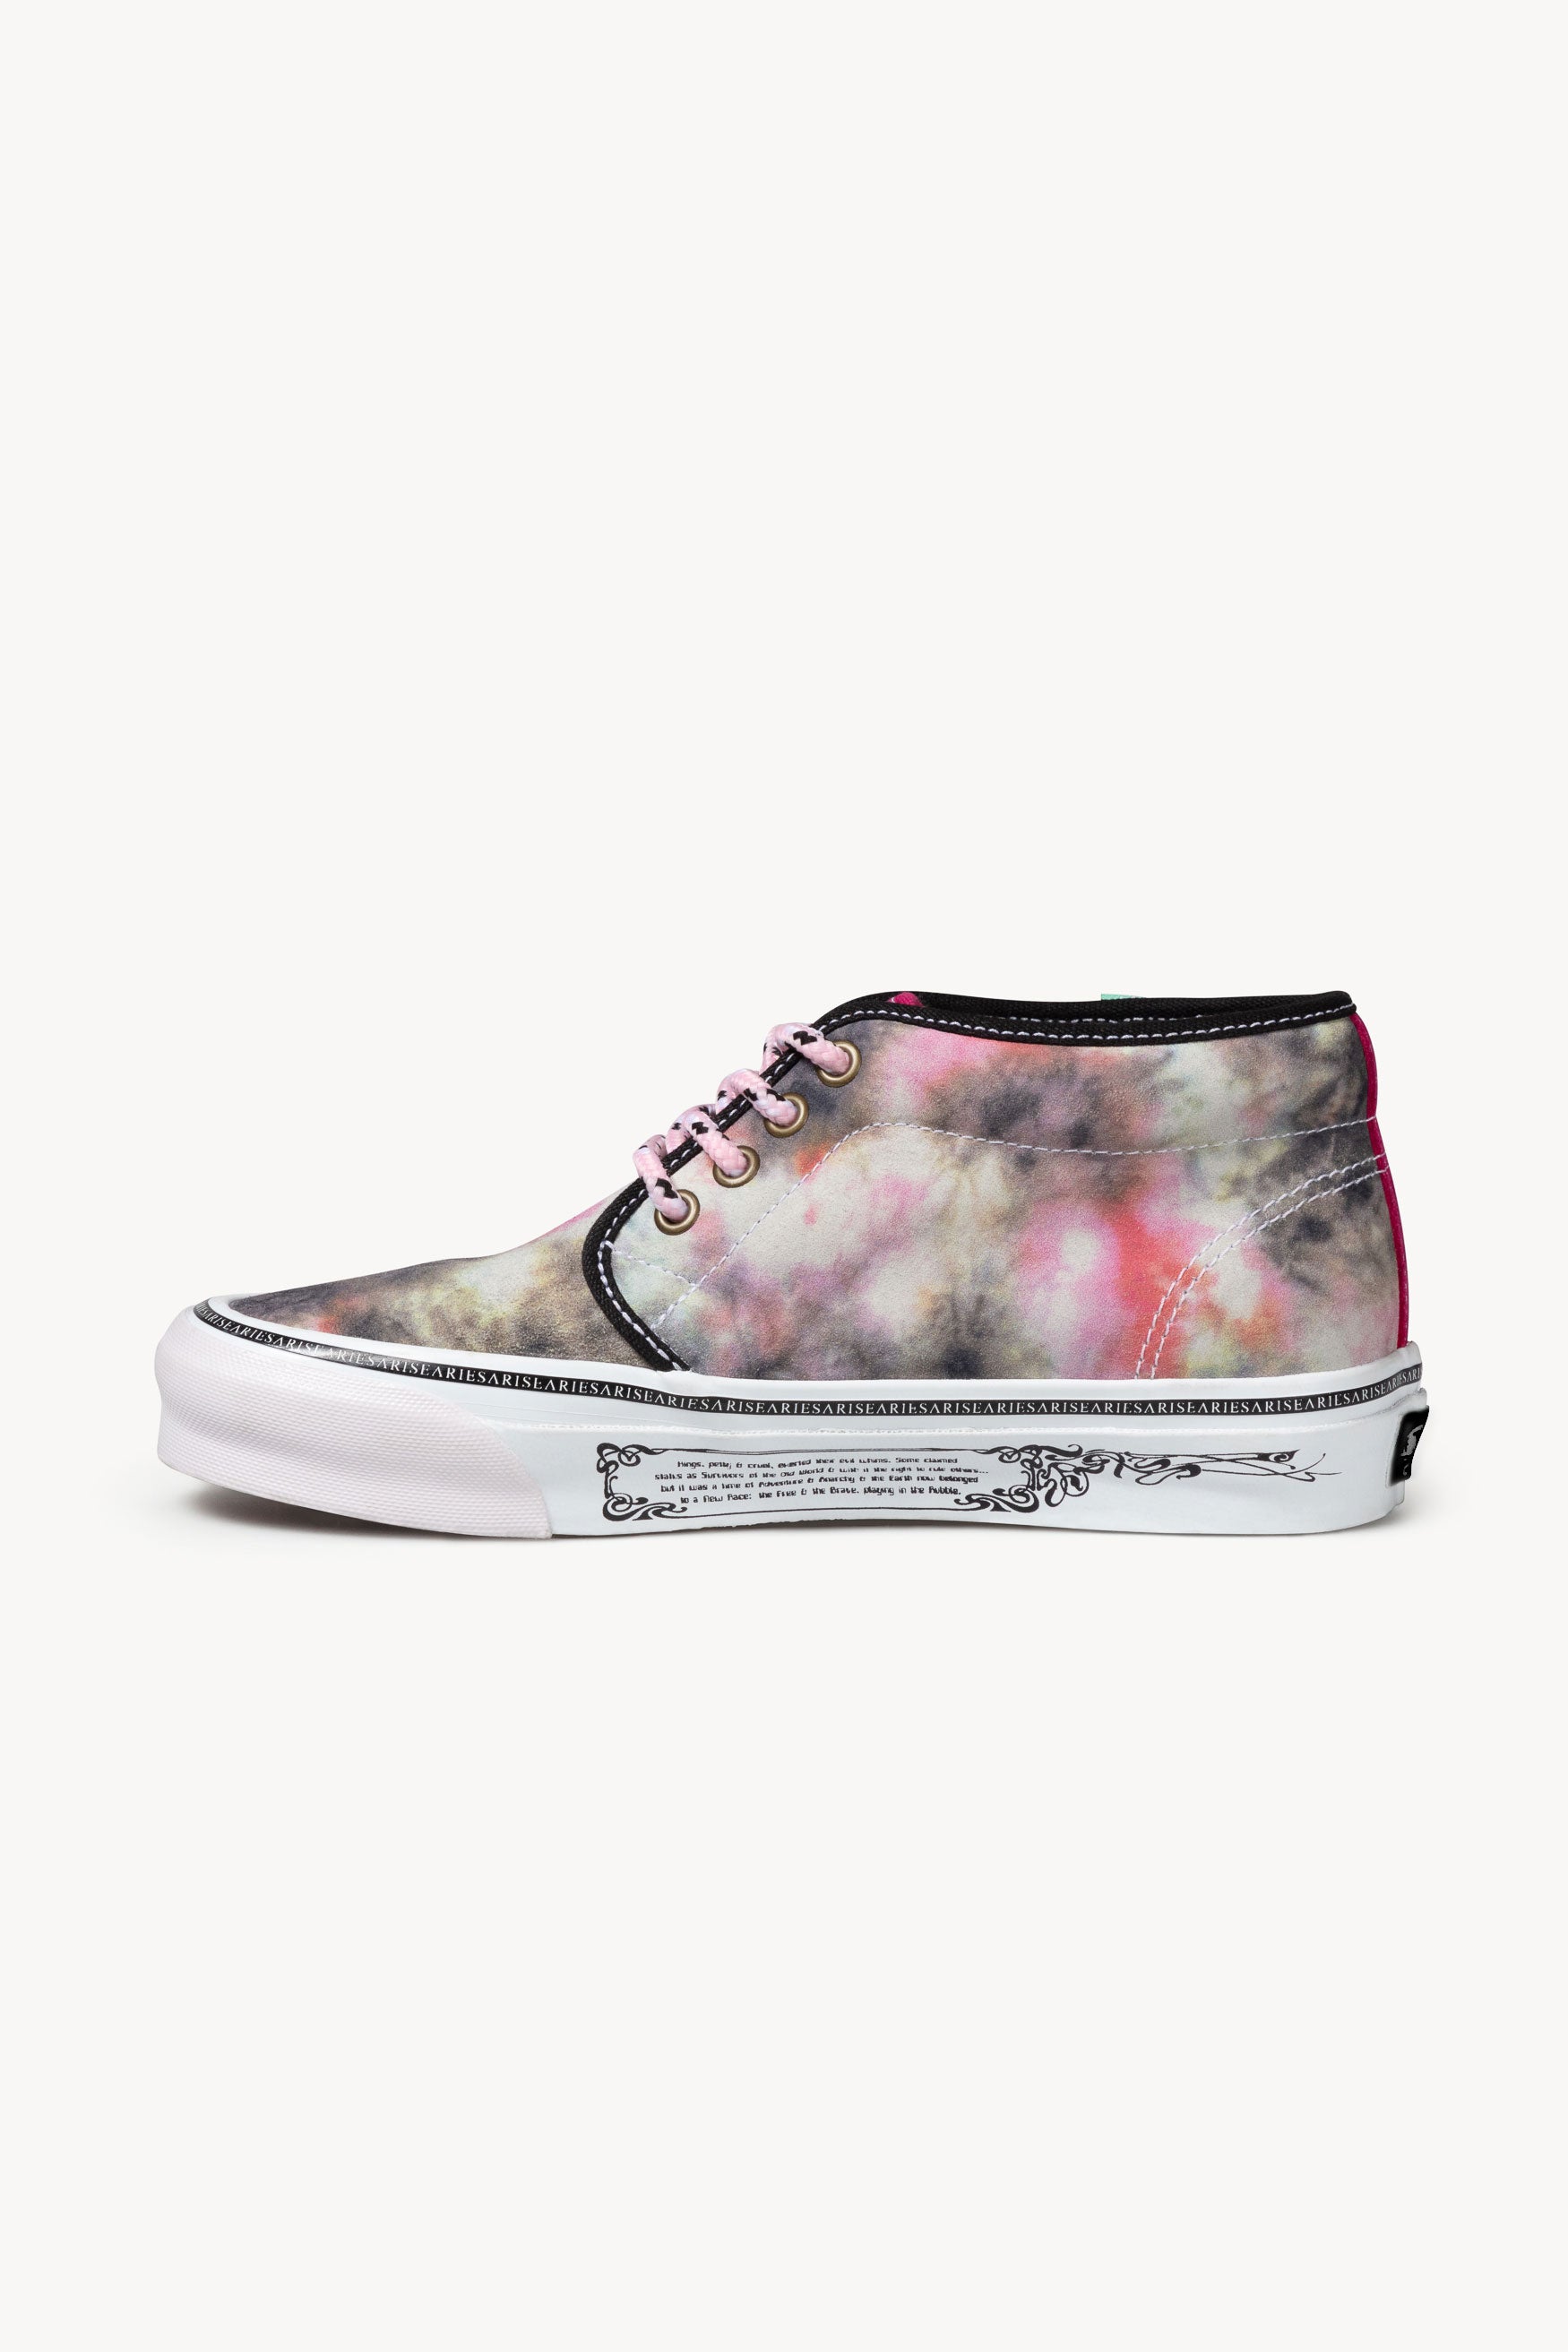 Load image into Gallery viewer, Aries x Vault by Vans Tie dye CHUKKA Boot LX